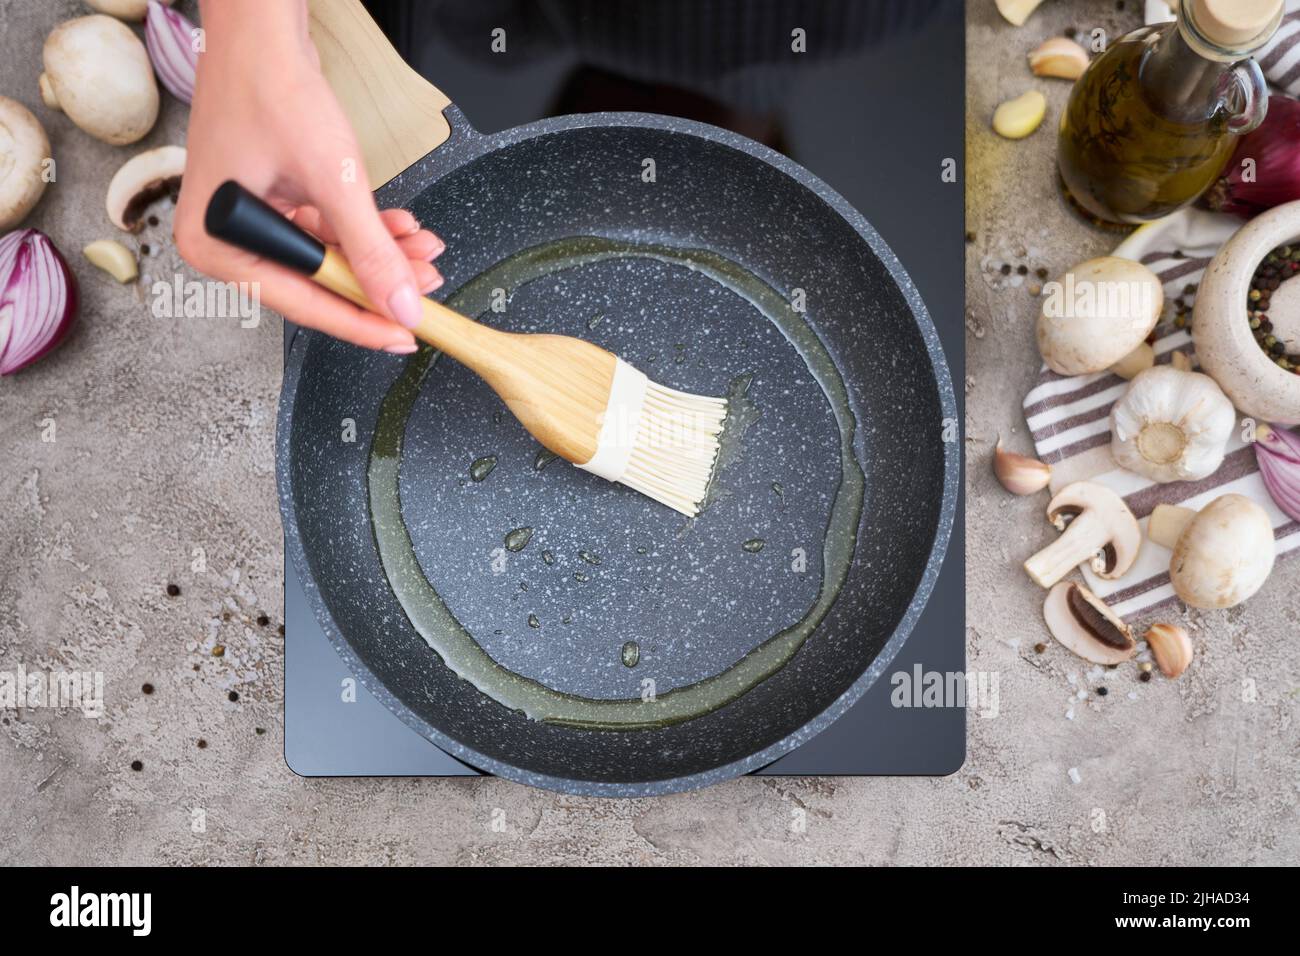 https://c8.alamy.com/comp/2JHAD34/woman-smear-olive-oil-on-frying-pan-with-silicone-brush-at-domestic-kitchen-2JHAD34.jpg